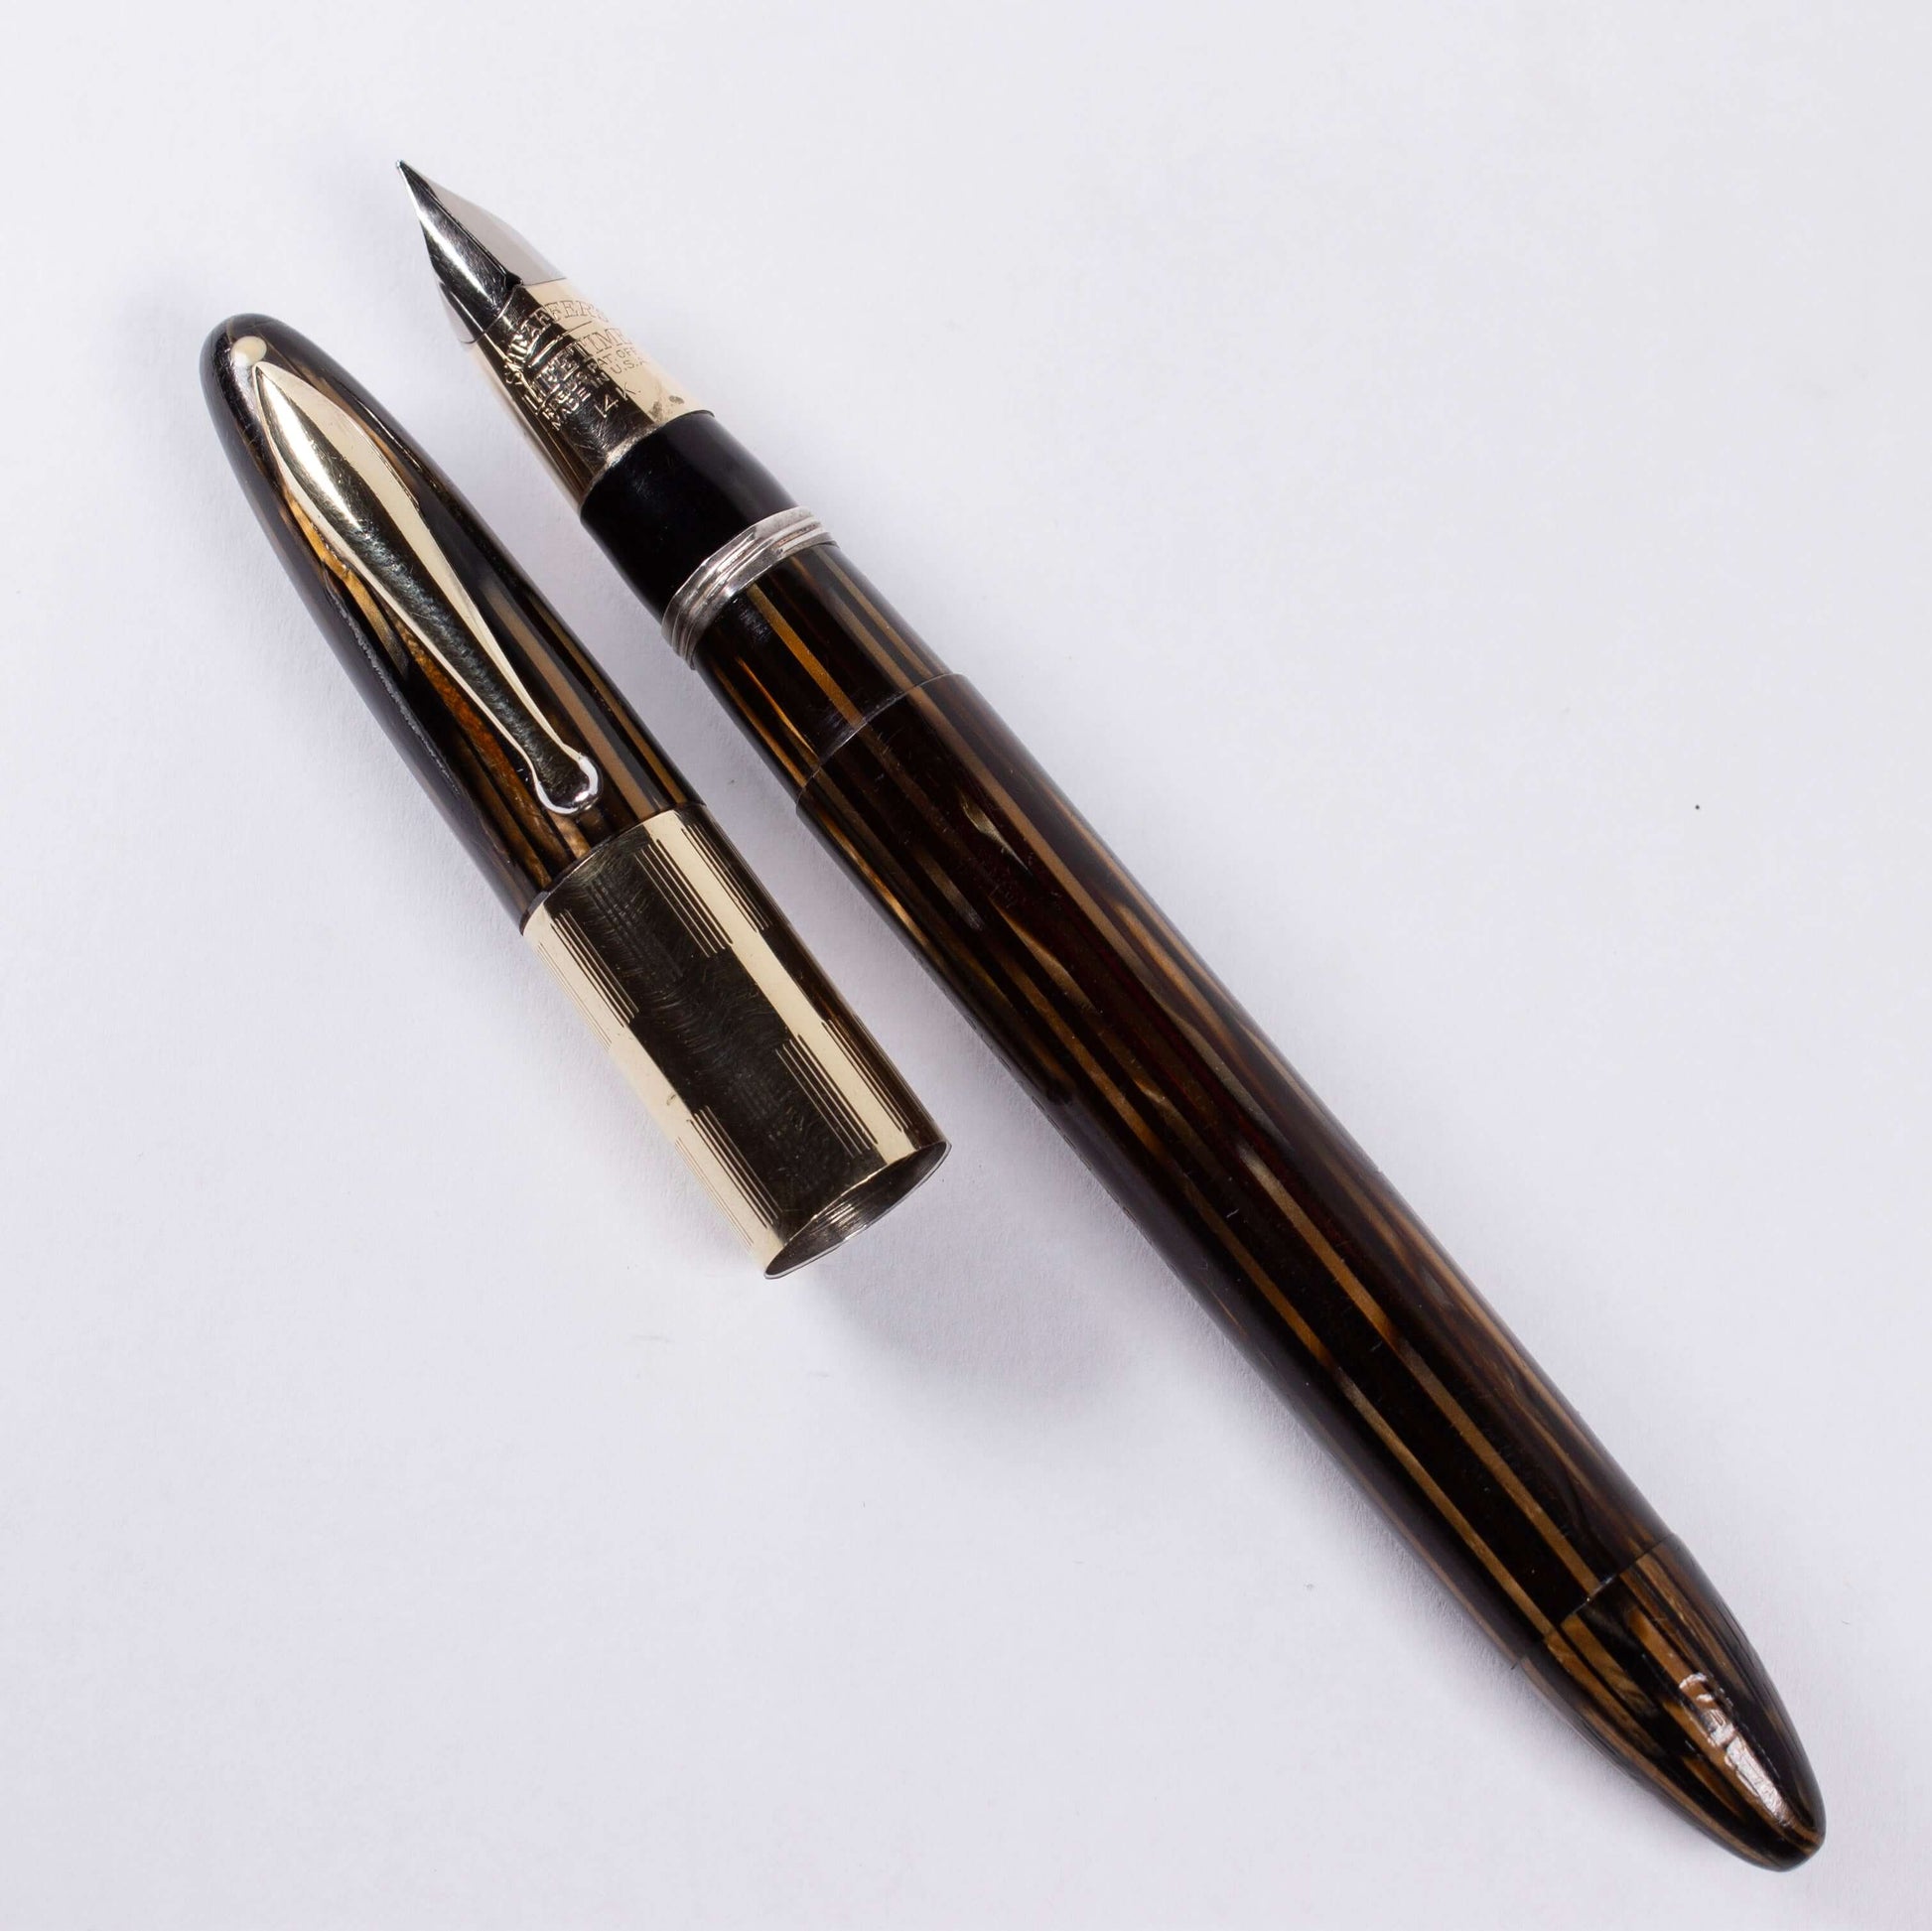 ${titleType: Vintage Vac-Fil Fountain Pen Product name: Sheaffer Triumph Vacuum-Fil Manufacturer and Year: 1940's Length: 5 1/8 inch Filling System: Vacuum-Fil, Plunger, restored with new section and piston Color/Pattern: Golden Brown Nib Type/Condition a